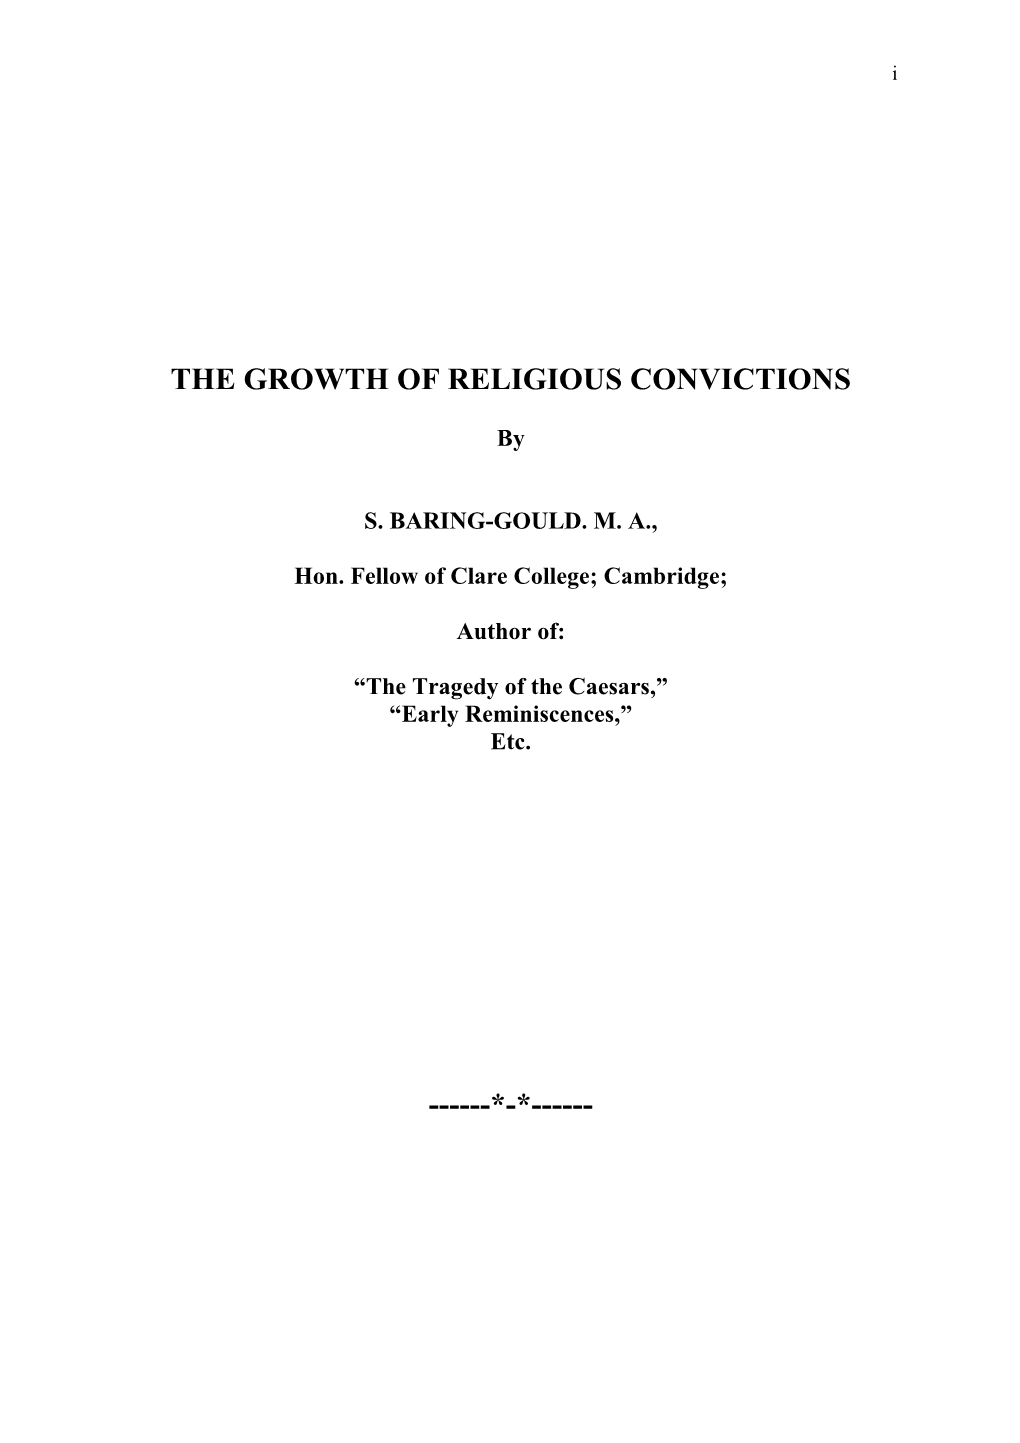 The Growth of Religious Convictions